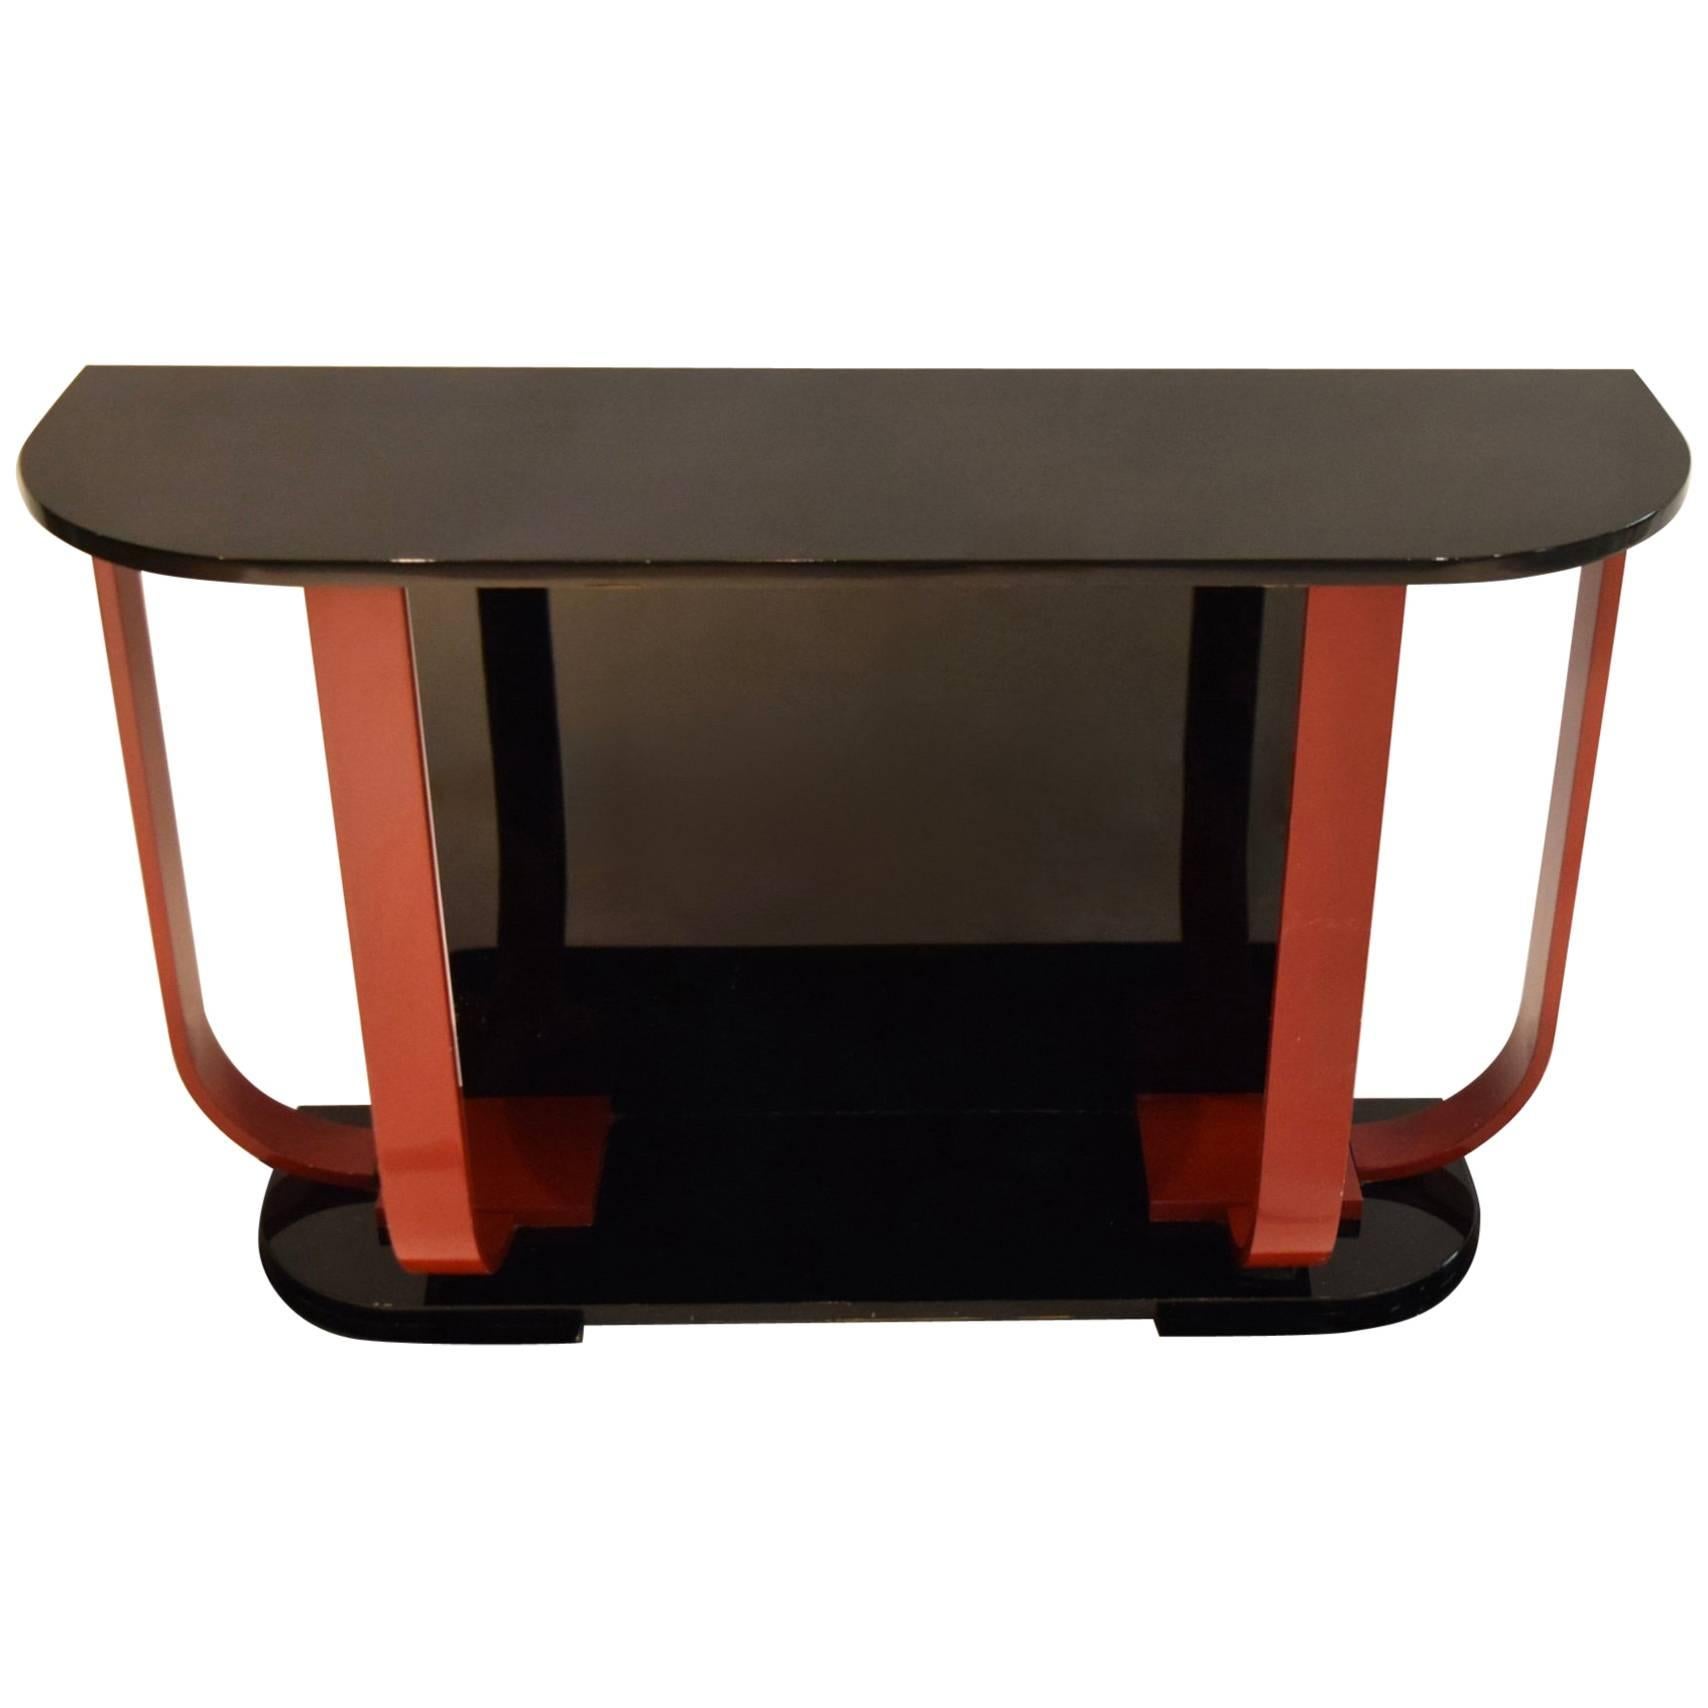 Black and Red Lacquered Console by  Roche Bobois circa 1975 Made in France